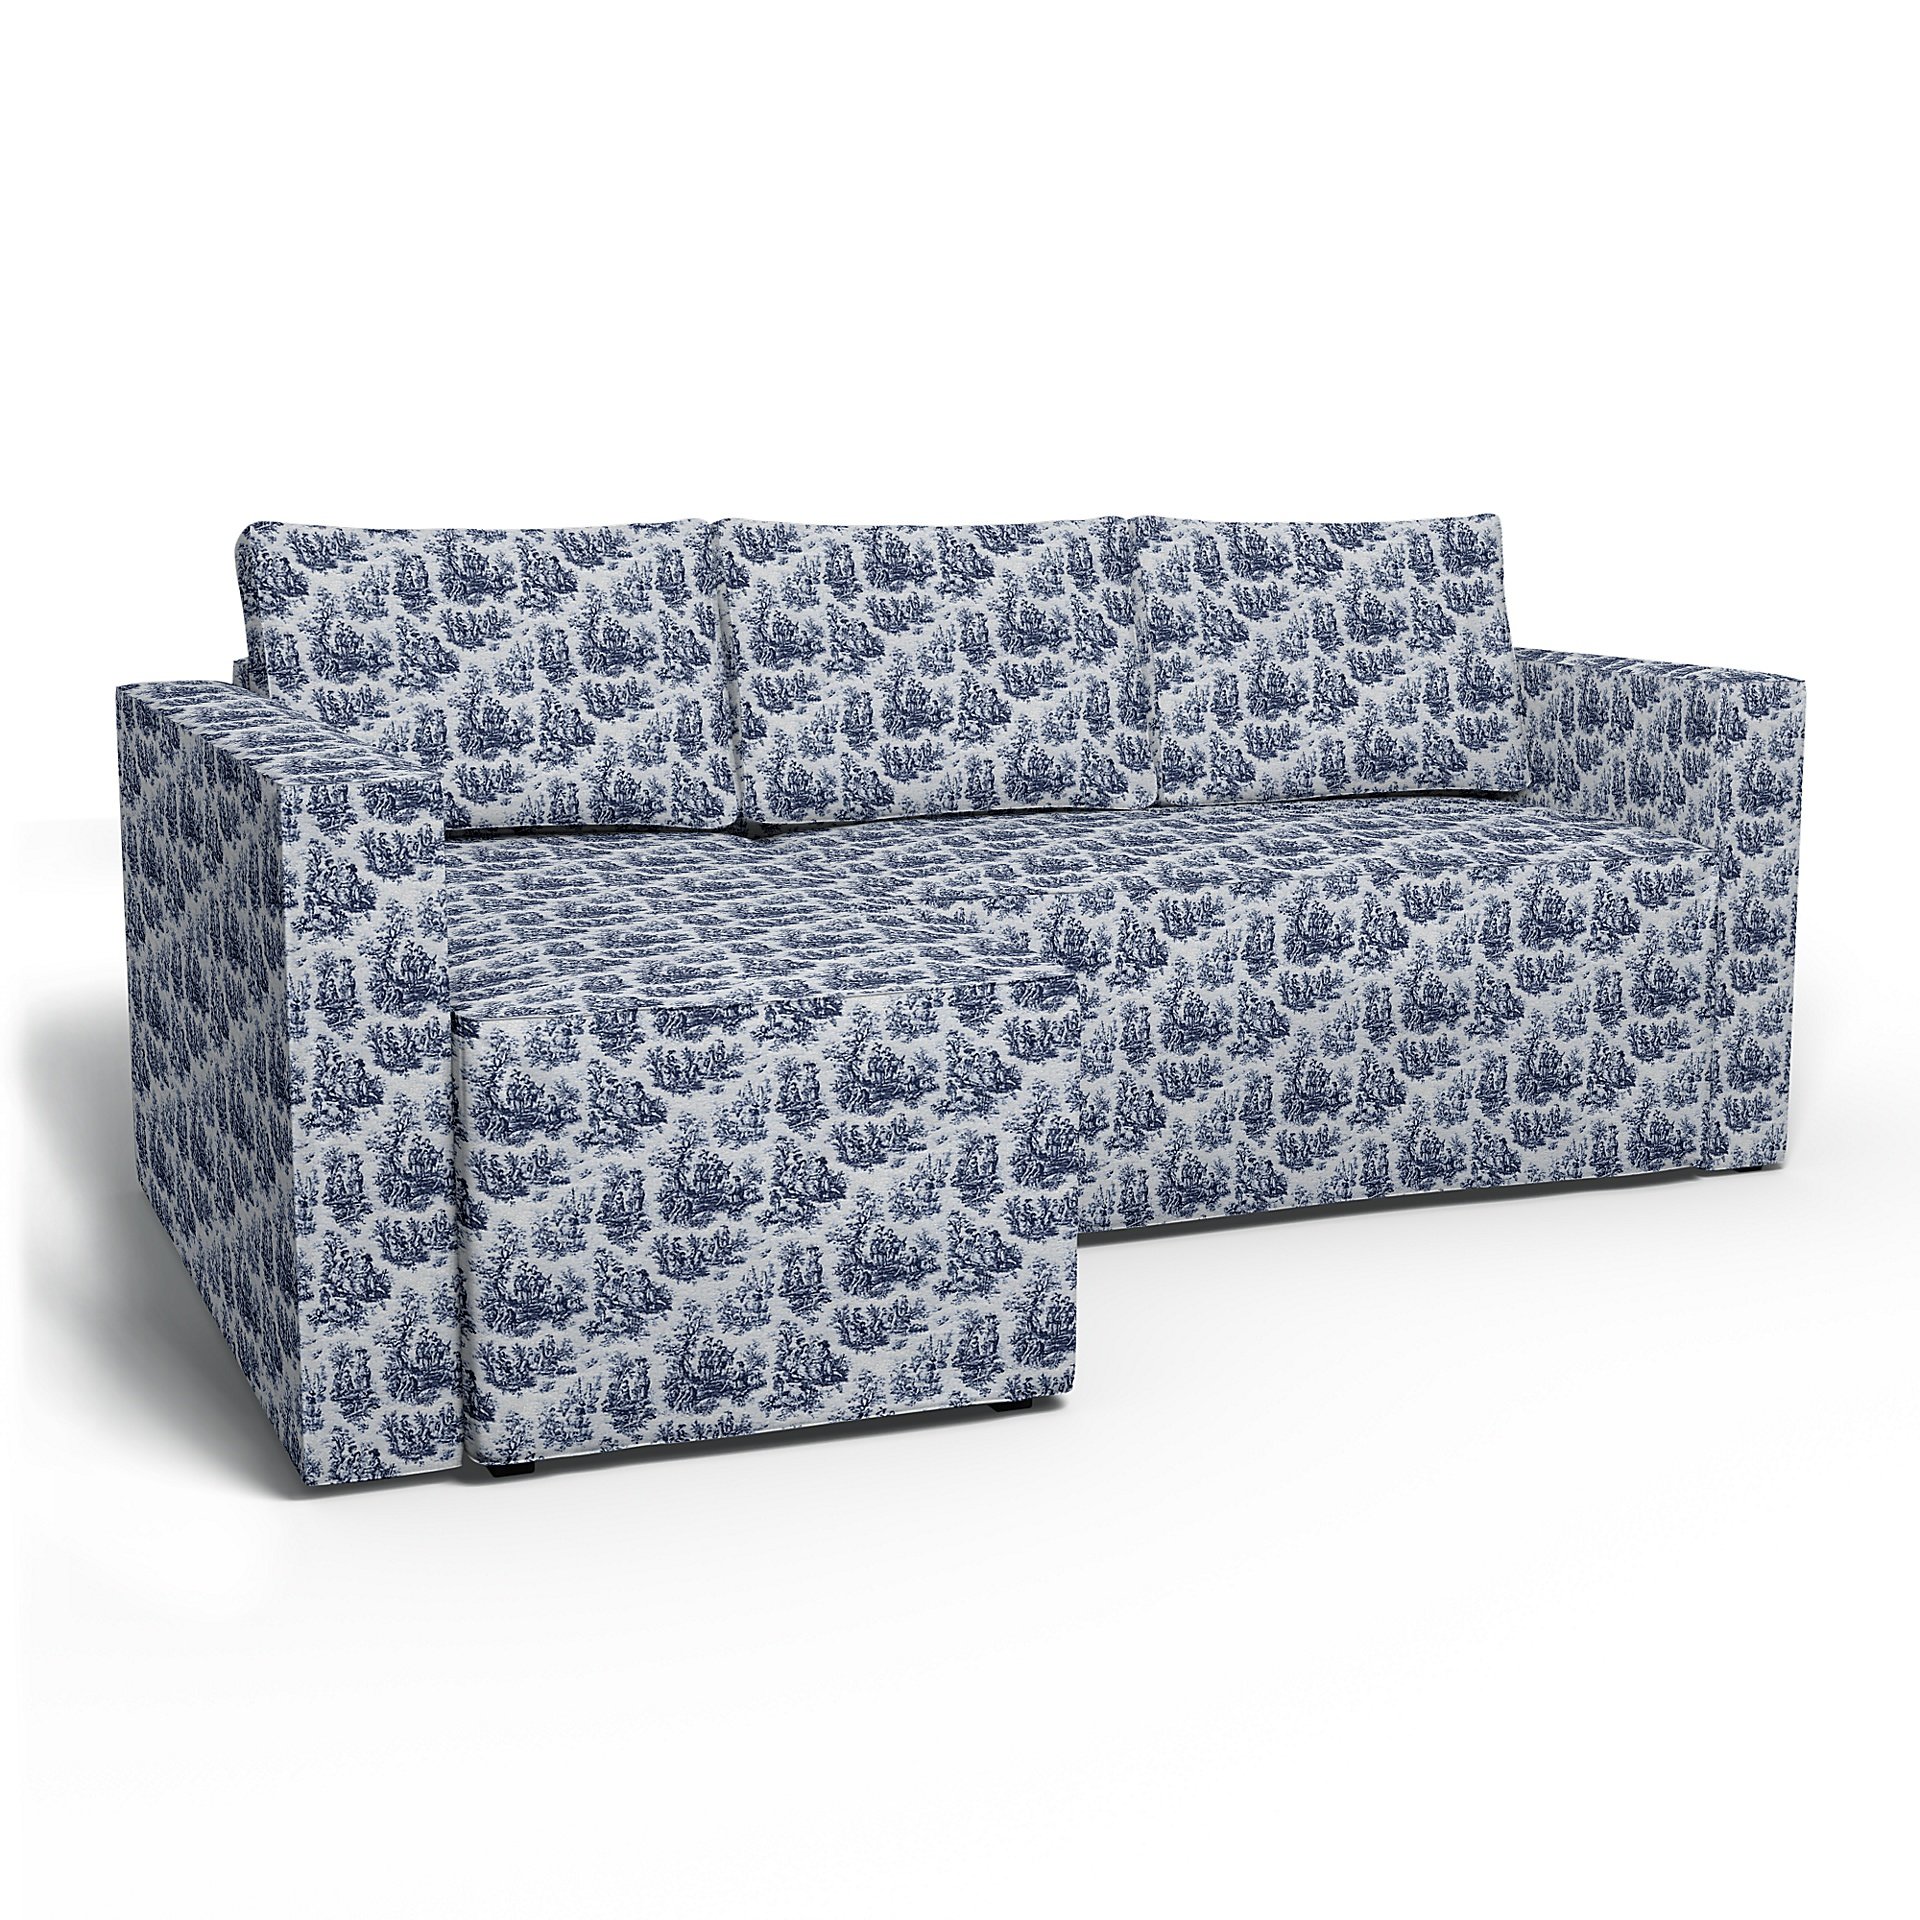 IKEA - Manstad Sofa Bed with Left Chaise Cover, Dark Blue, Boucle & Texture - Bemz